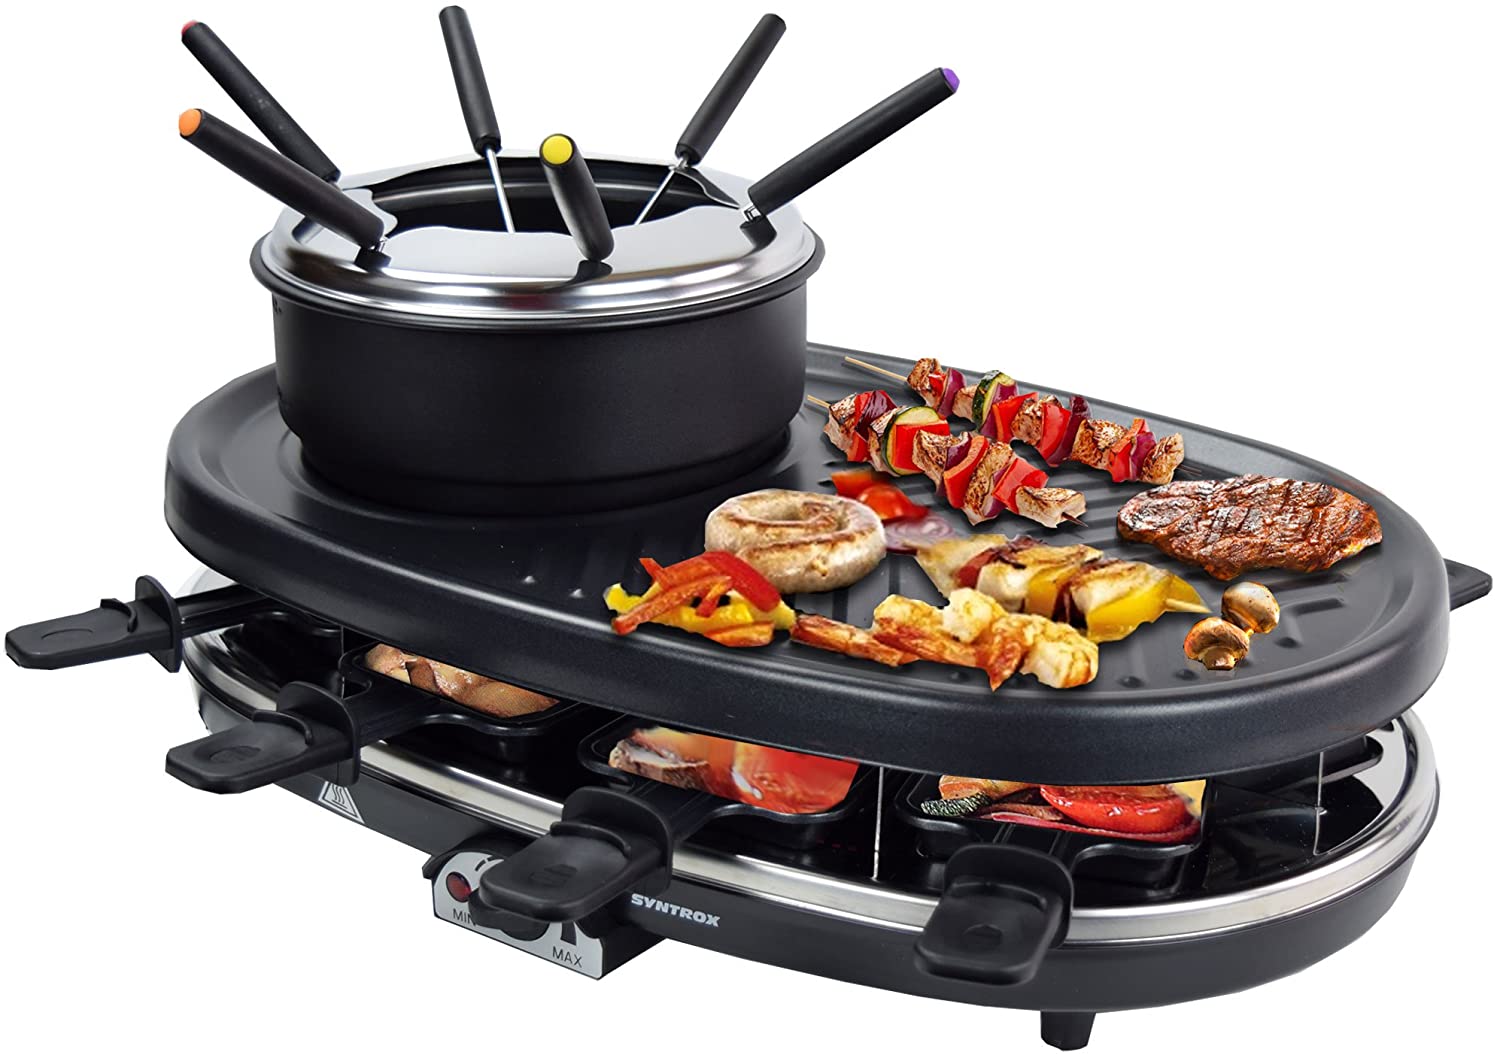 Syntrox Germany Appenzell 3 in 1 Raclette Grill Fondue for 8 People